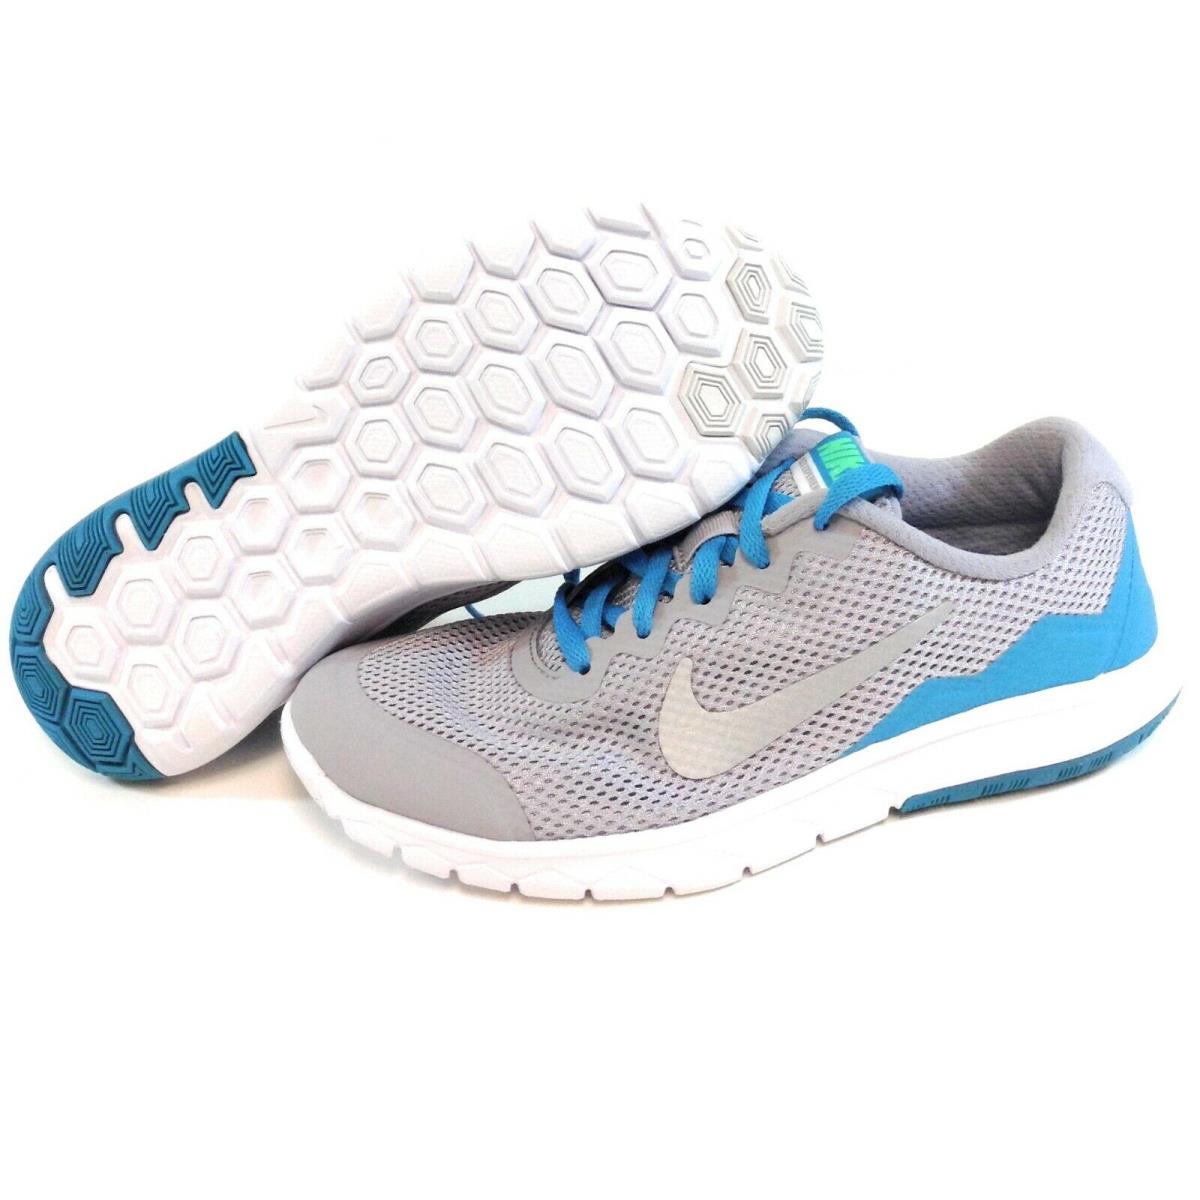 Girls Kids Youth Nike Flex Experience 4 749818 004 Grey Blue Sneakers Shoes - Grey